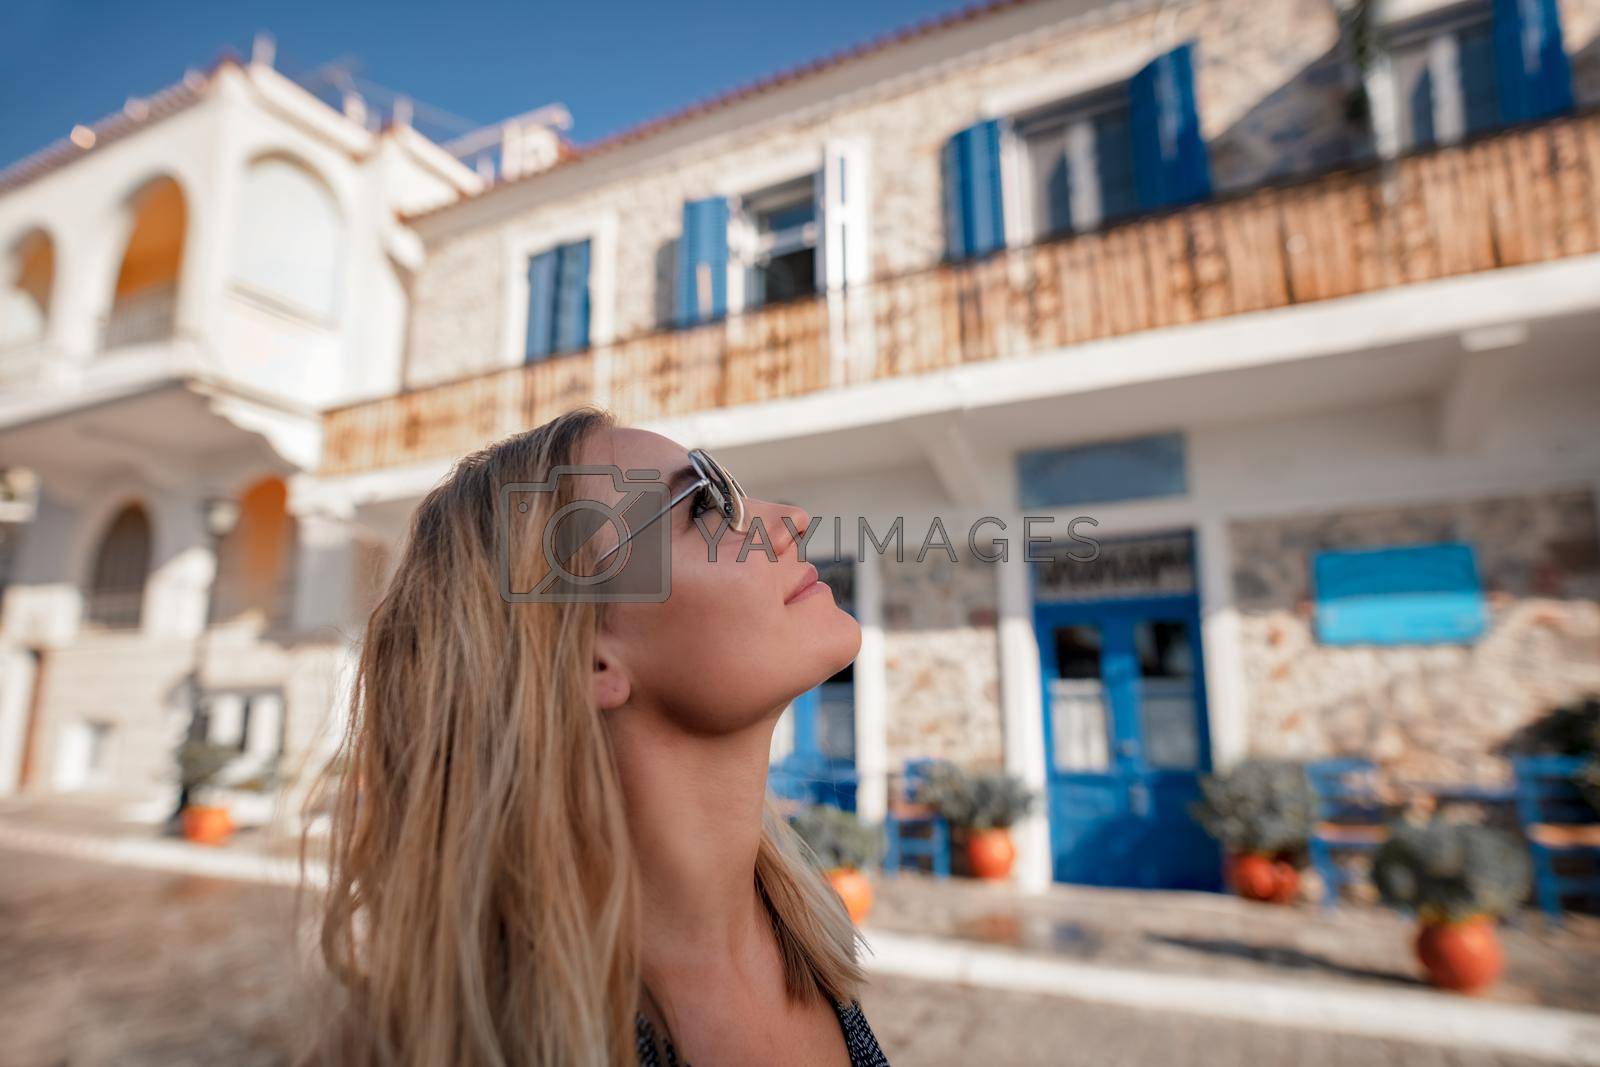 Closeup Portrait of Nice Happy Female Enjoying Bright Sunny Day on Greek Islands. Travel to Greece. Summertime Vacation.